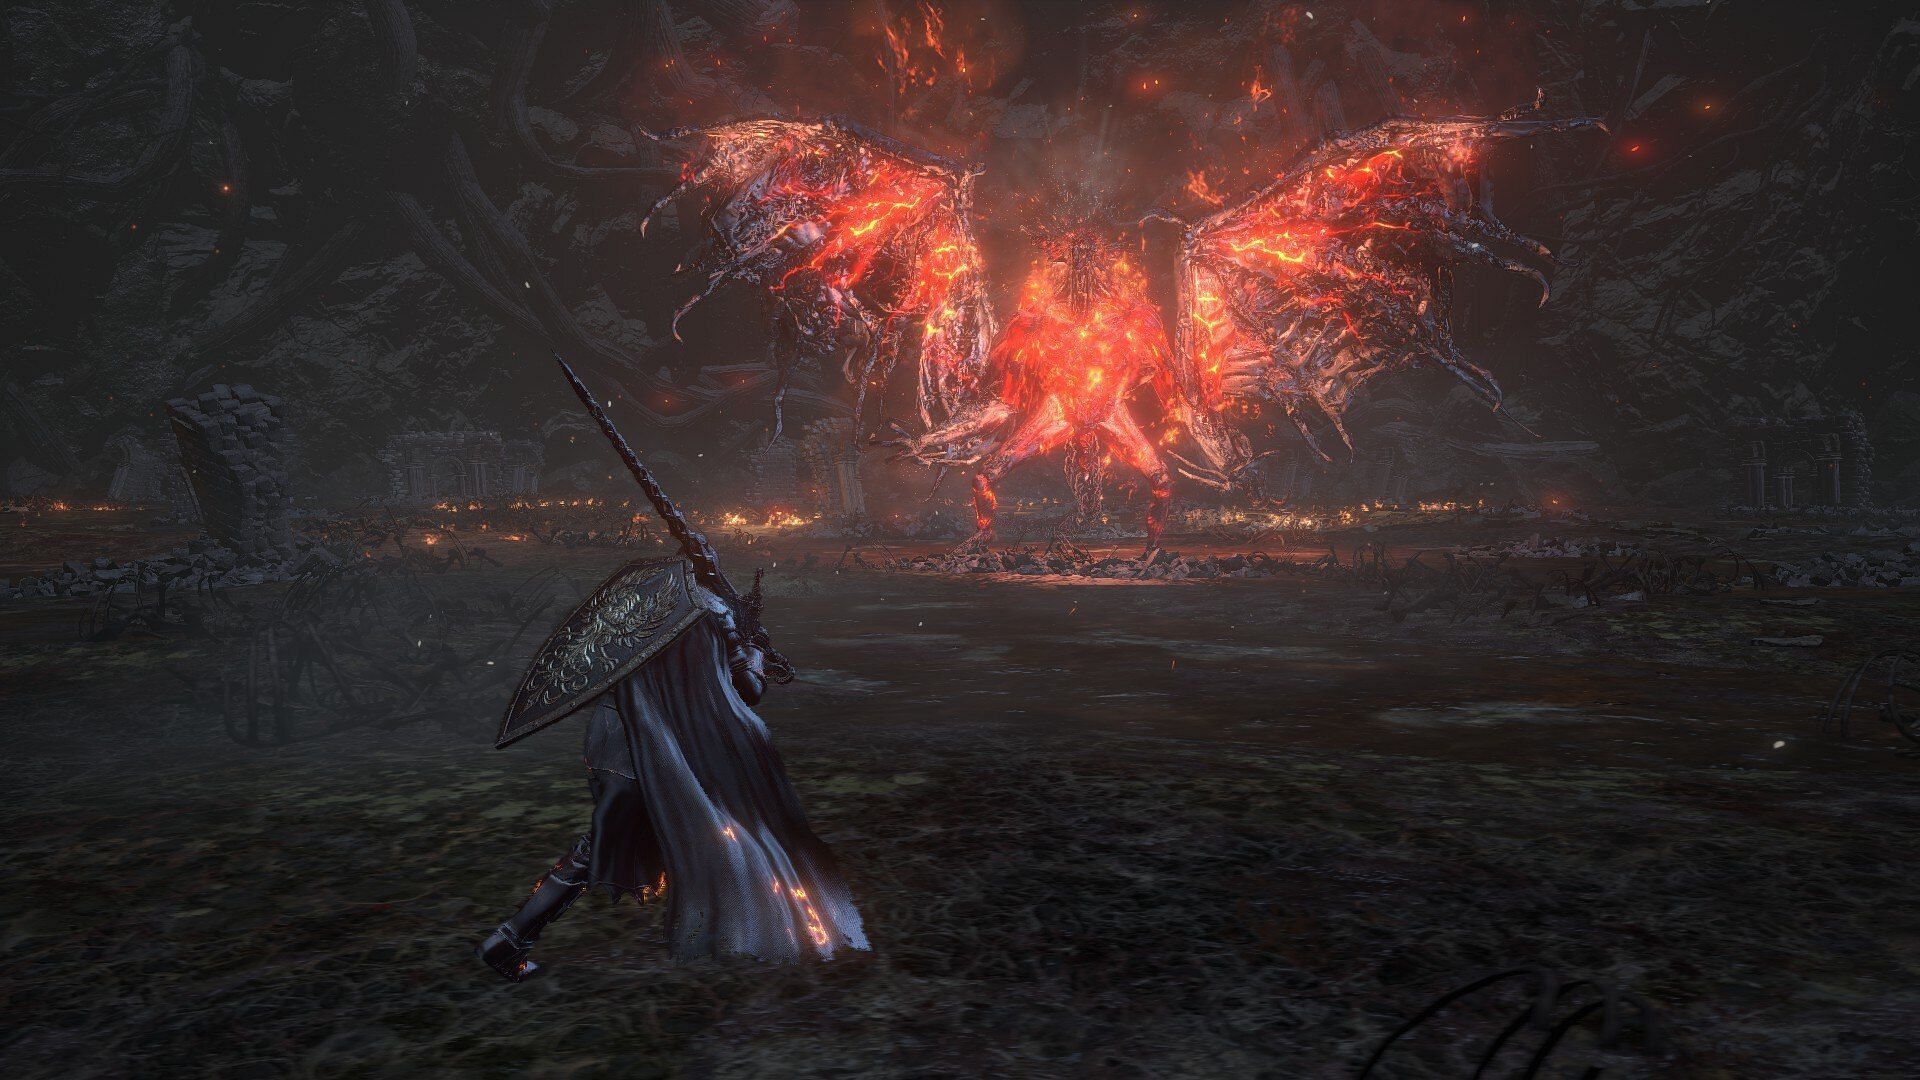 The Demon Prince awakens... (image by FromSoftware)